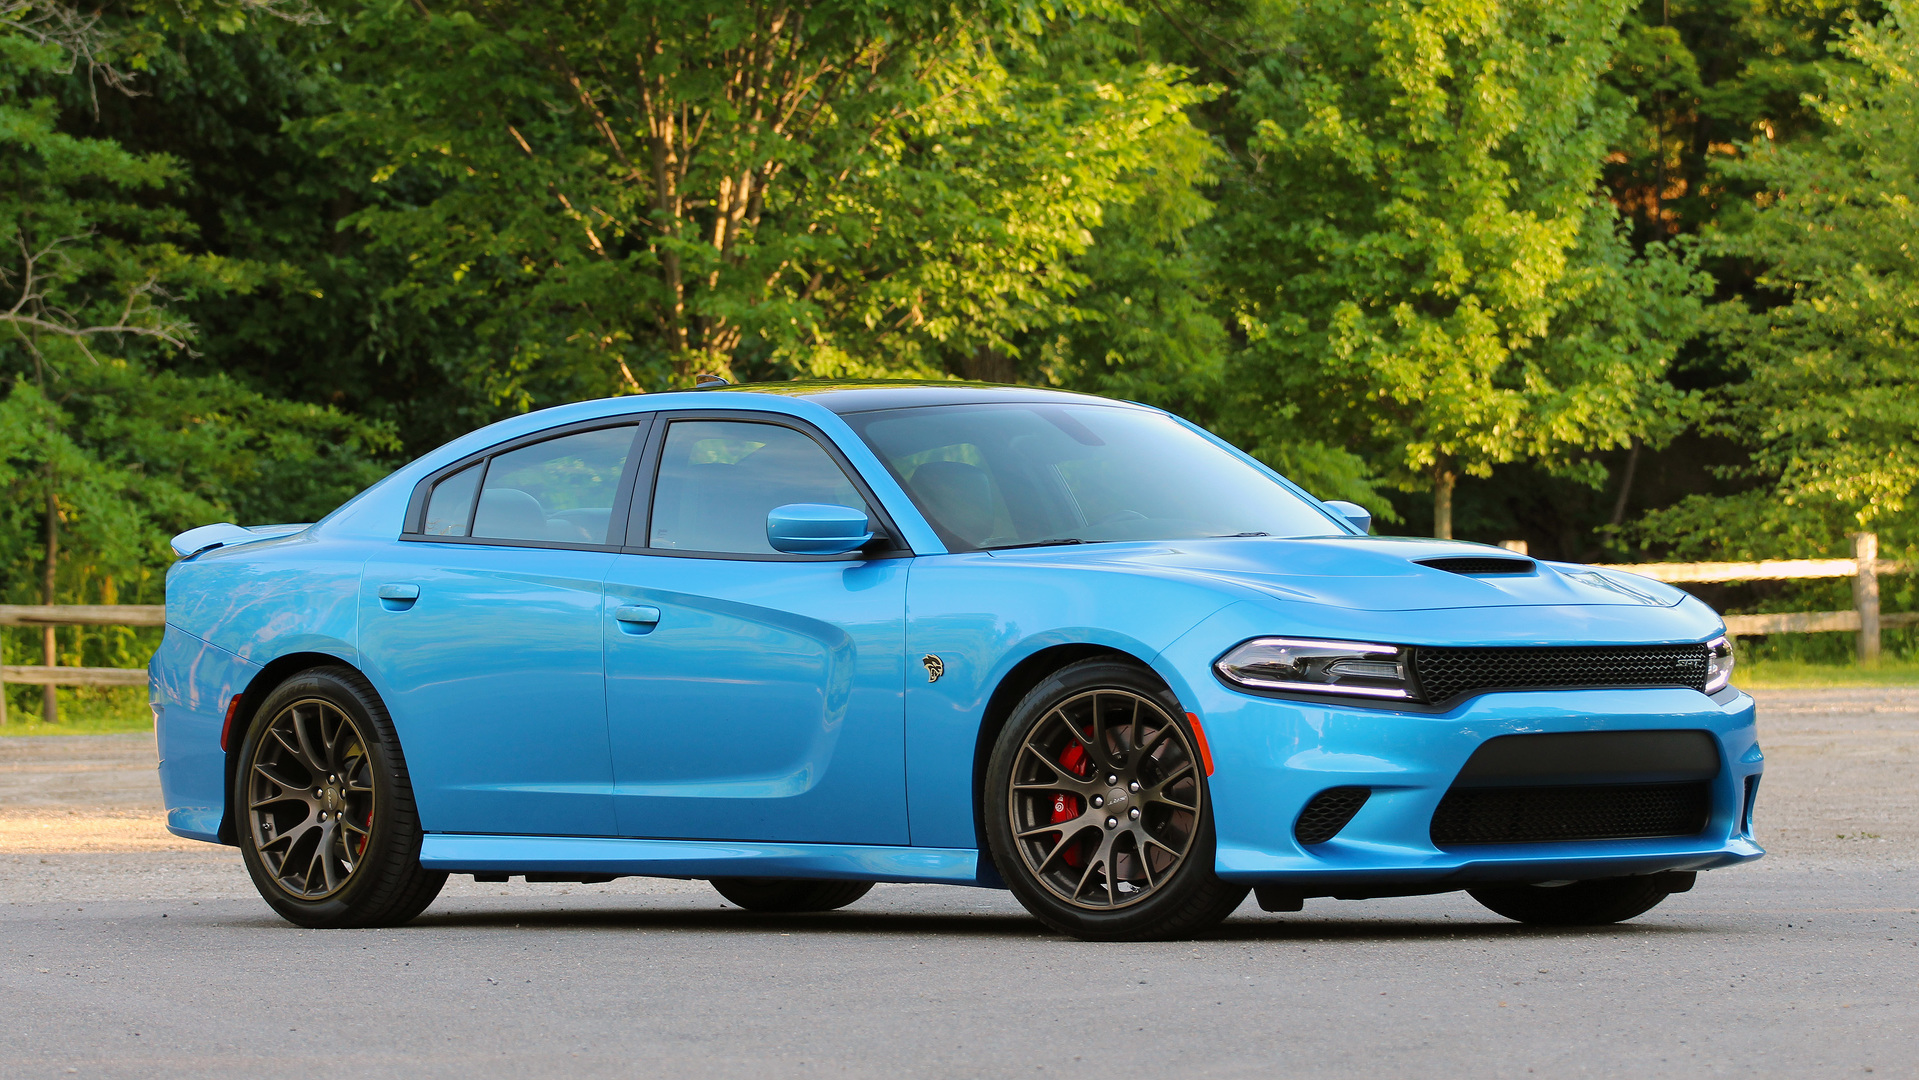 Review: 2016 Dodge Charger SRT Hellcat